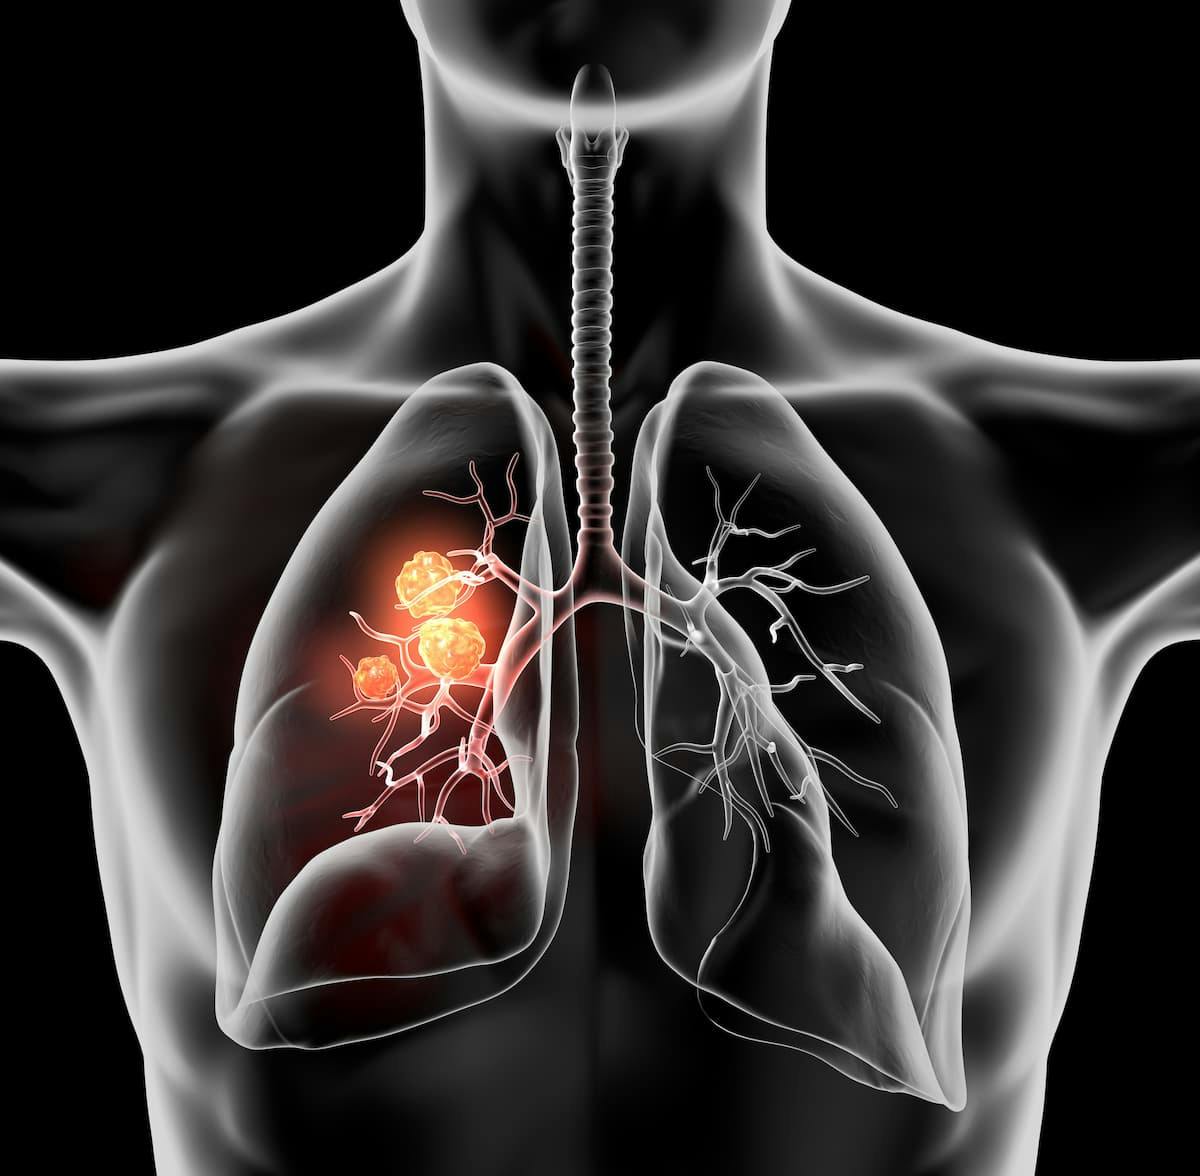 The National Institute for Health and Care Excellence has given a positive opinion of mobocertinib as a treatment for previously treated advanced non-small cell lung cancer with EGFR exon 20 insertion mutations.